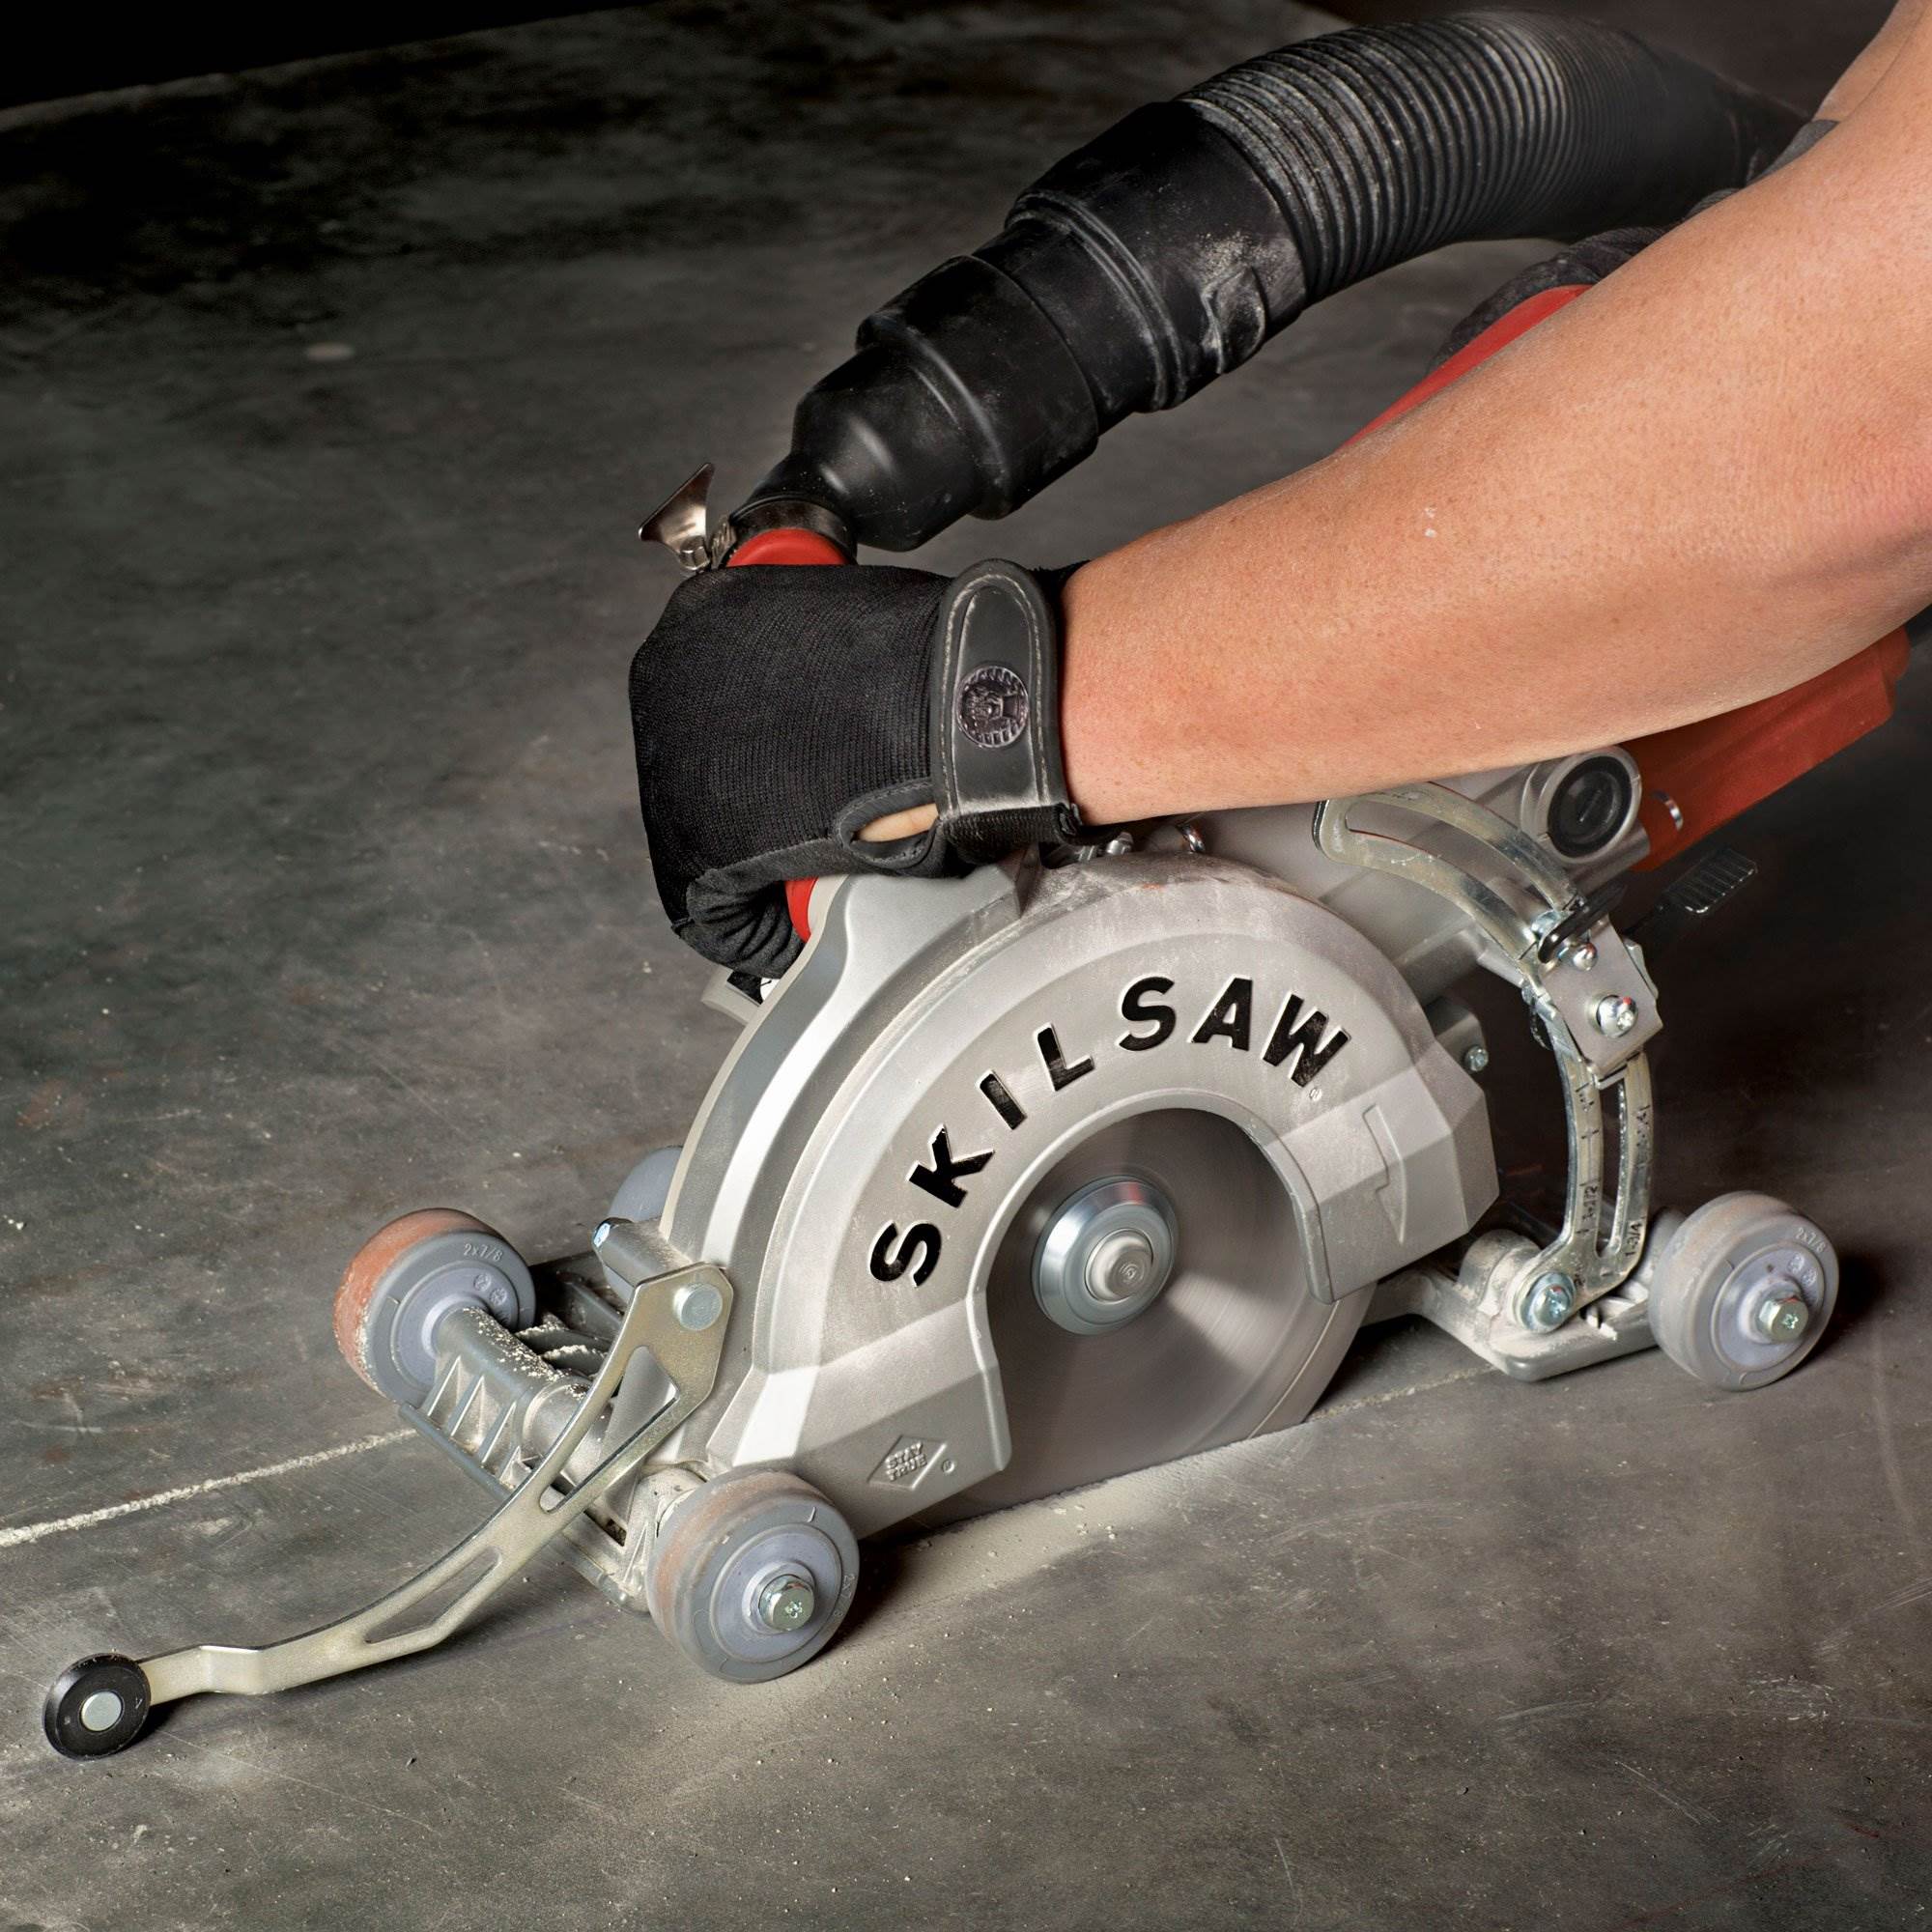 Skilsaw SPT79-00 Medusaw Inch 15 Amp Aluminum Worm Drive Saw for Concrete 